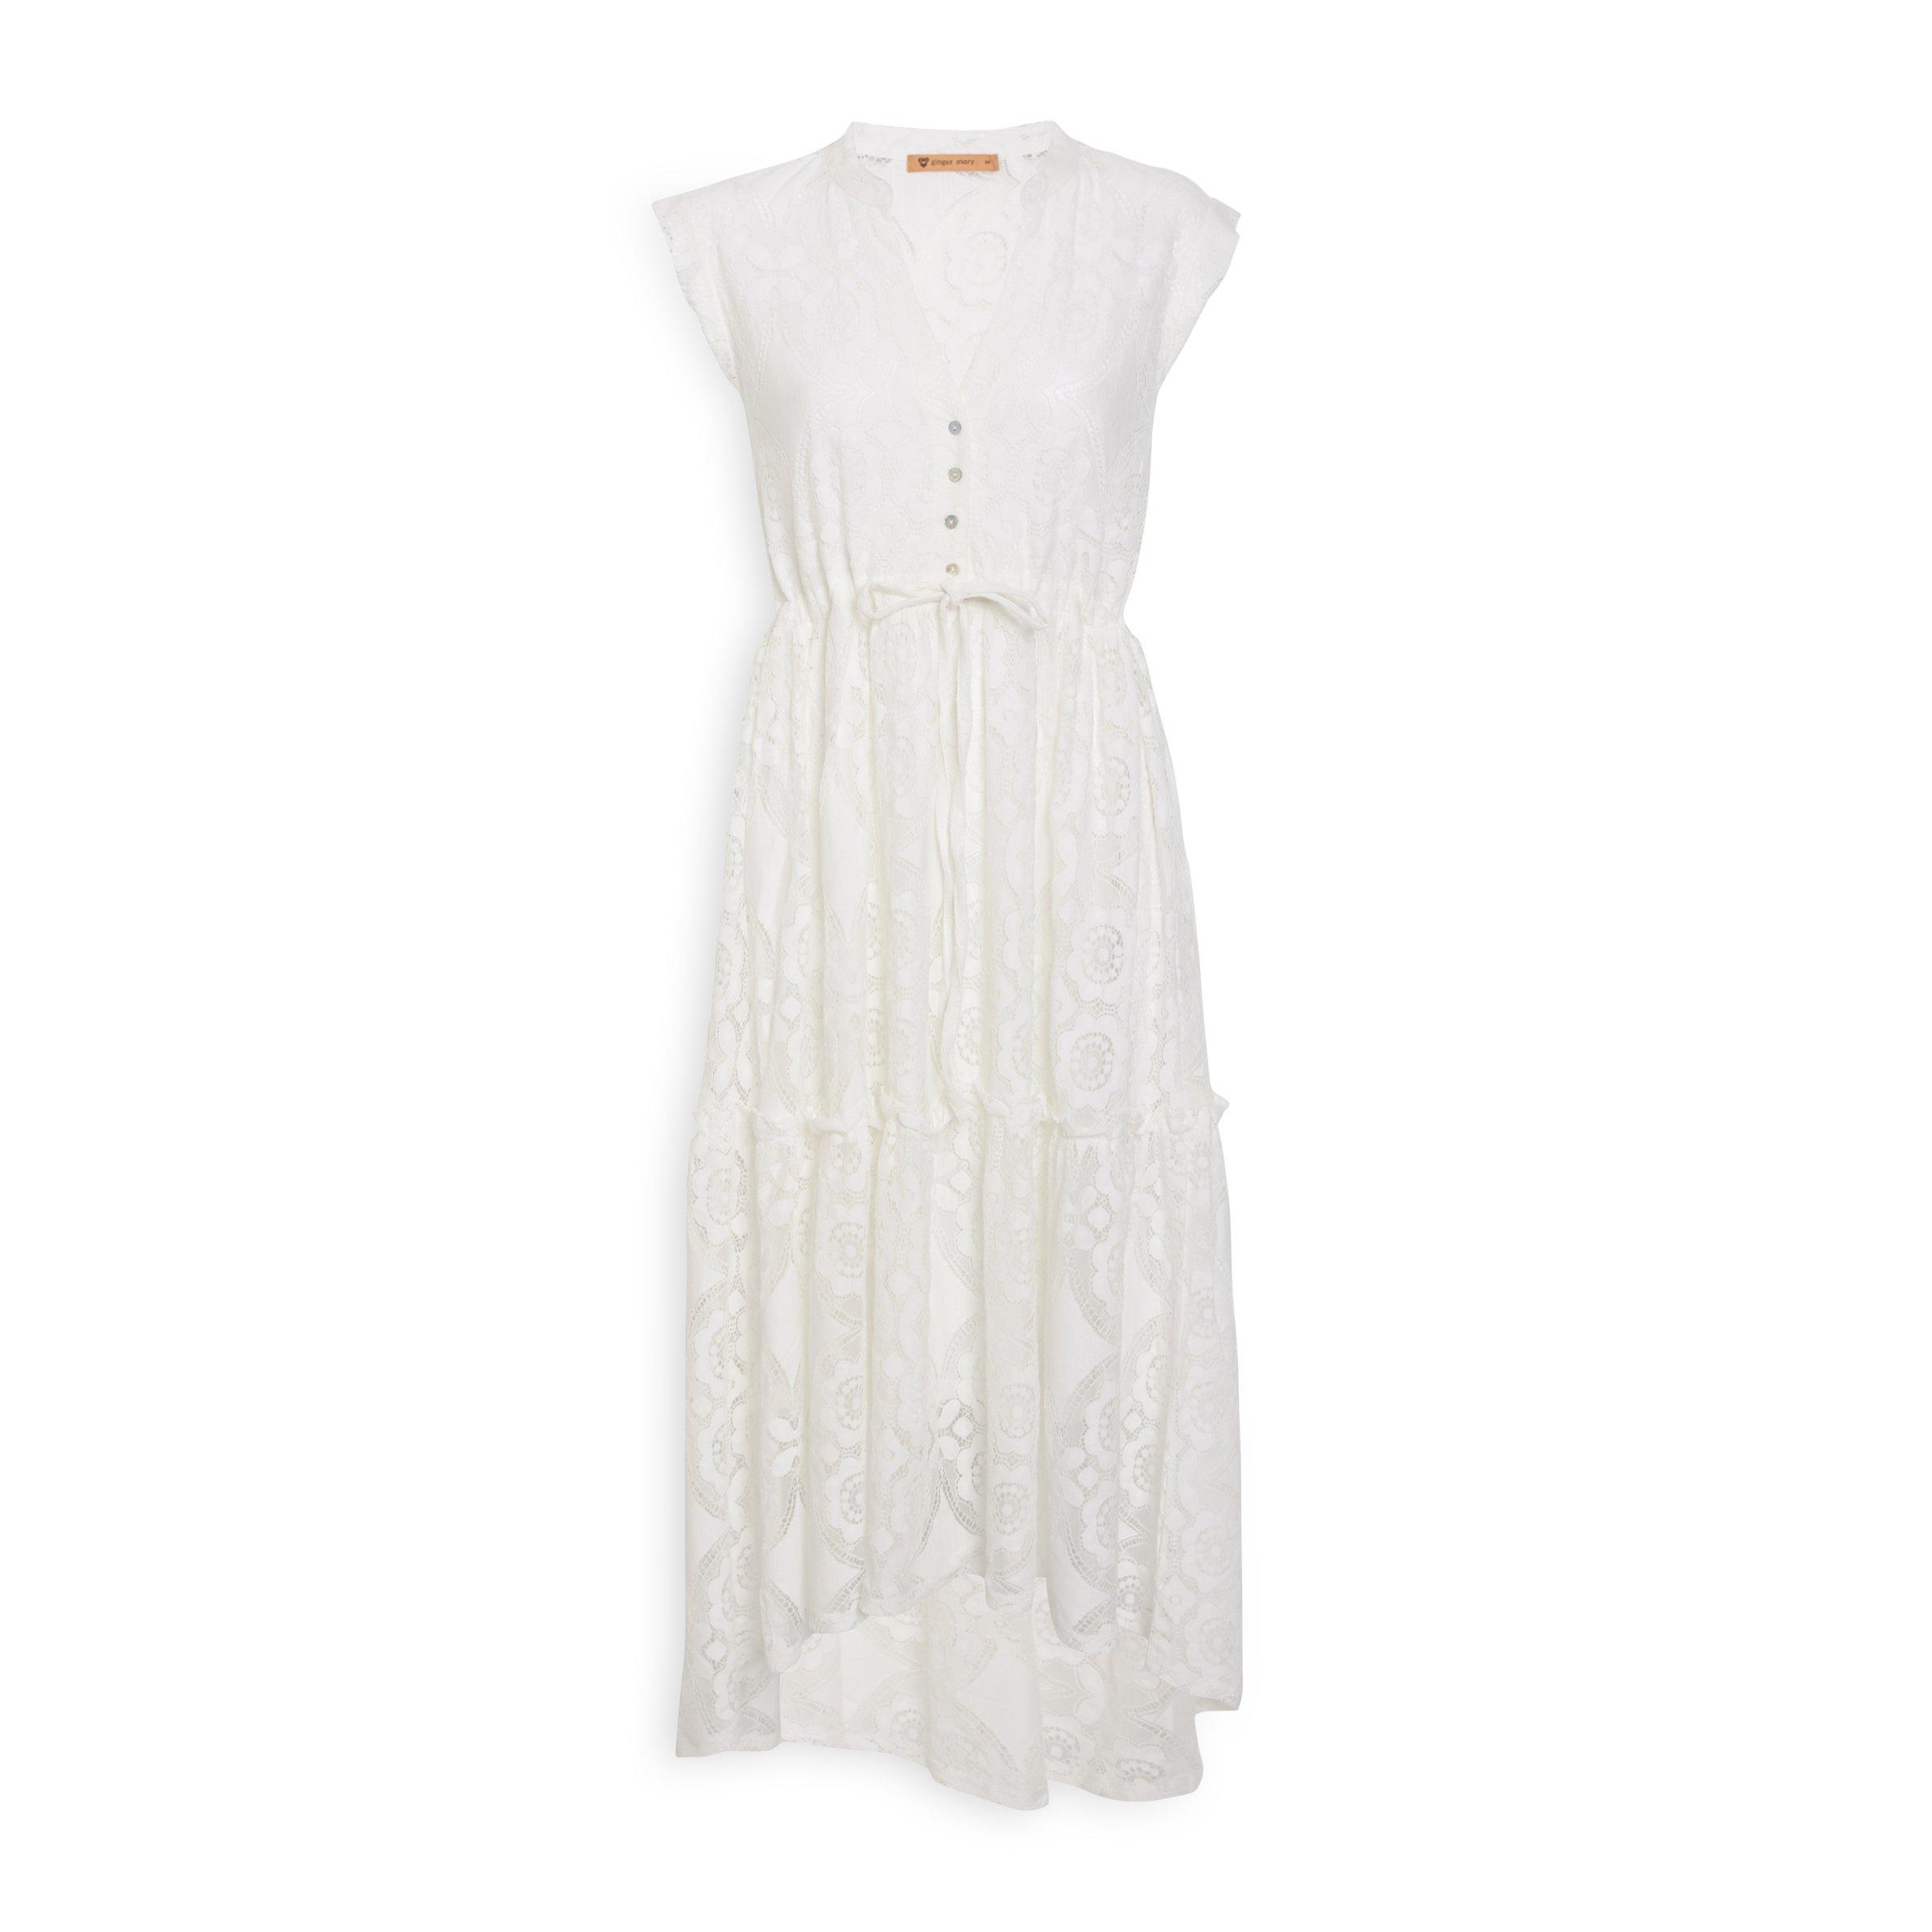 Buy Ginger Mary White Lace Dress Online | Truworths